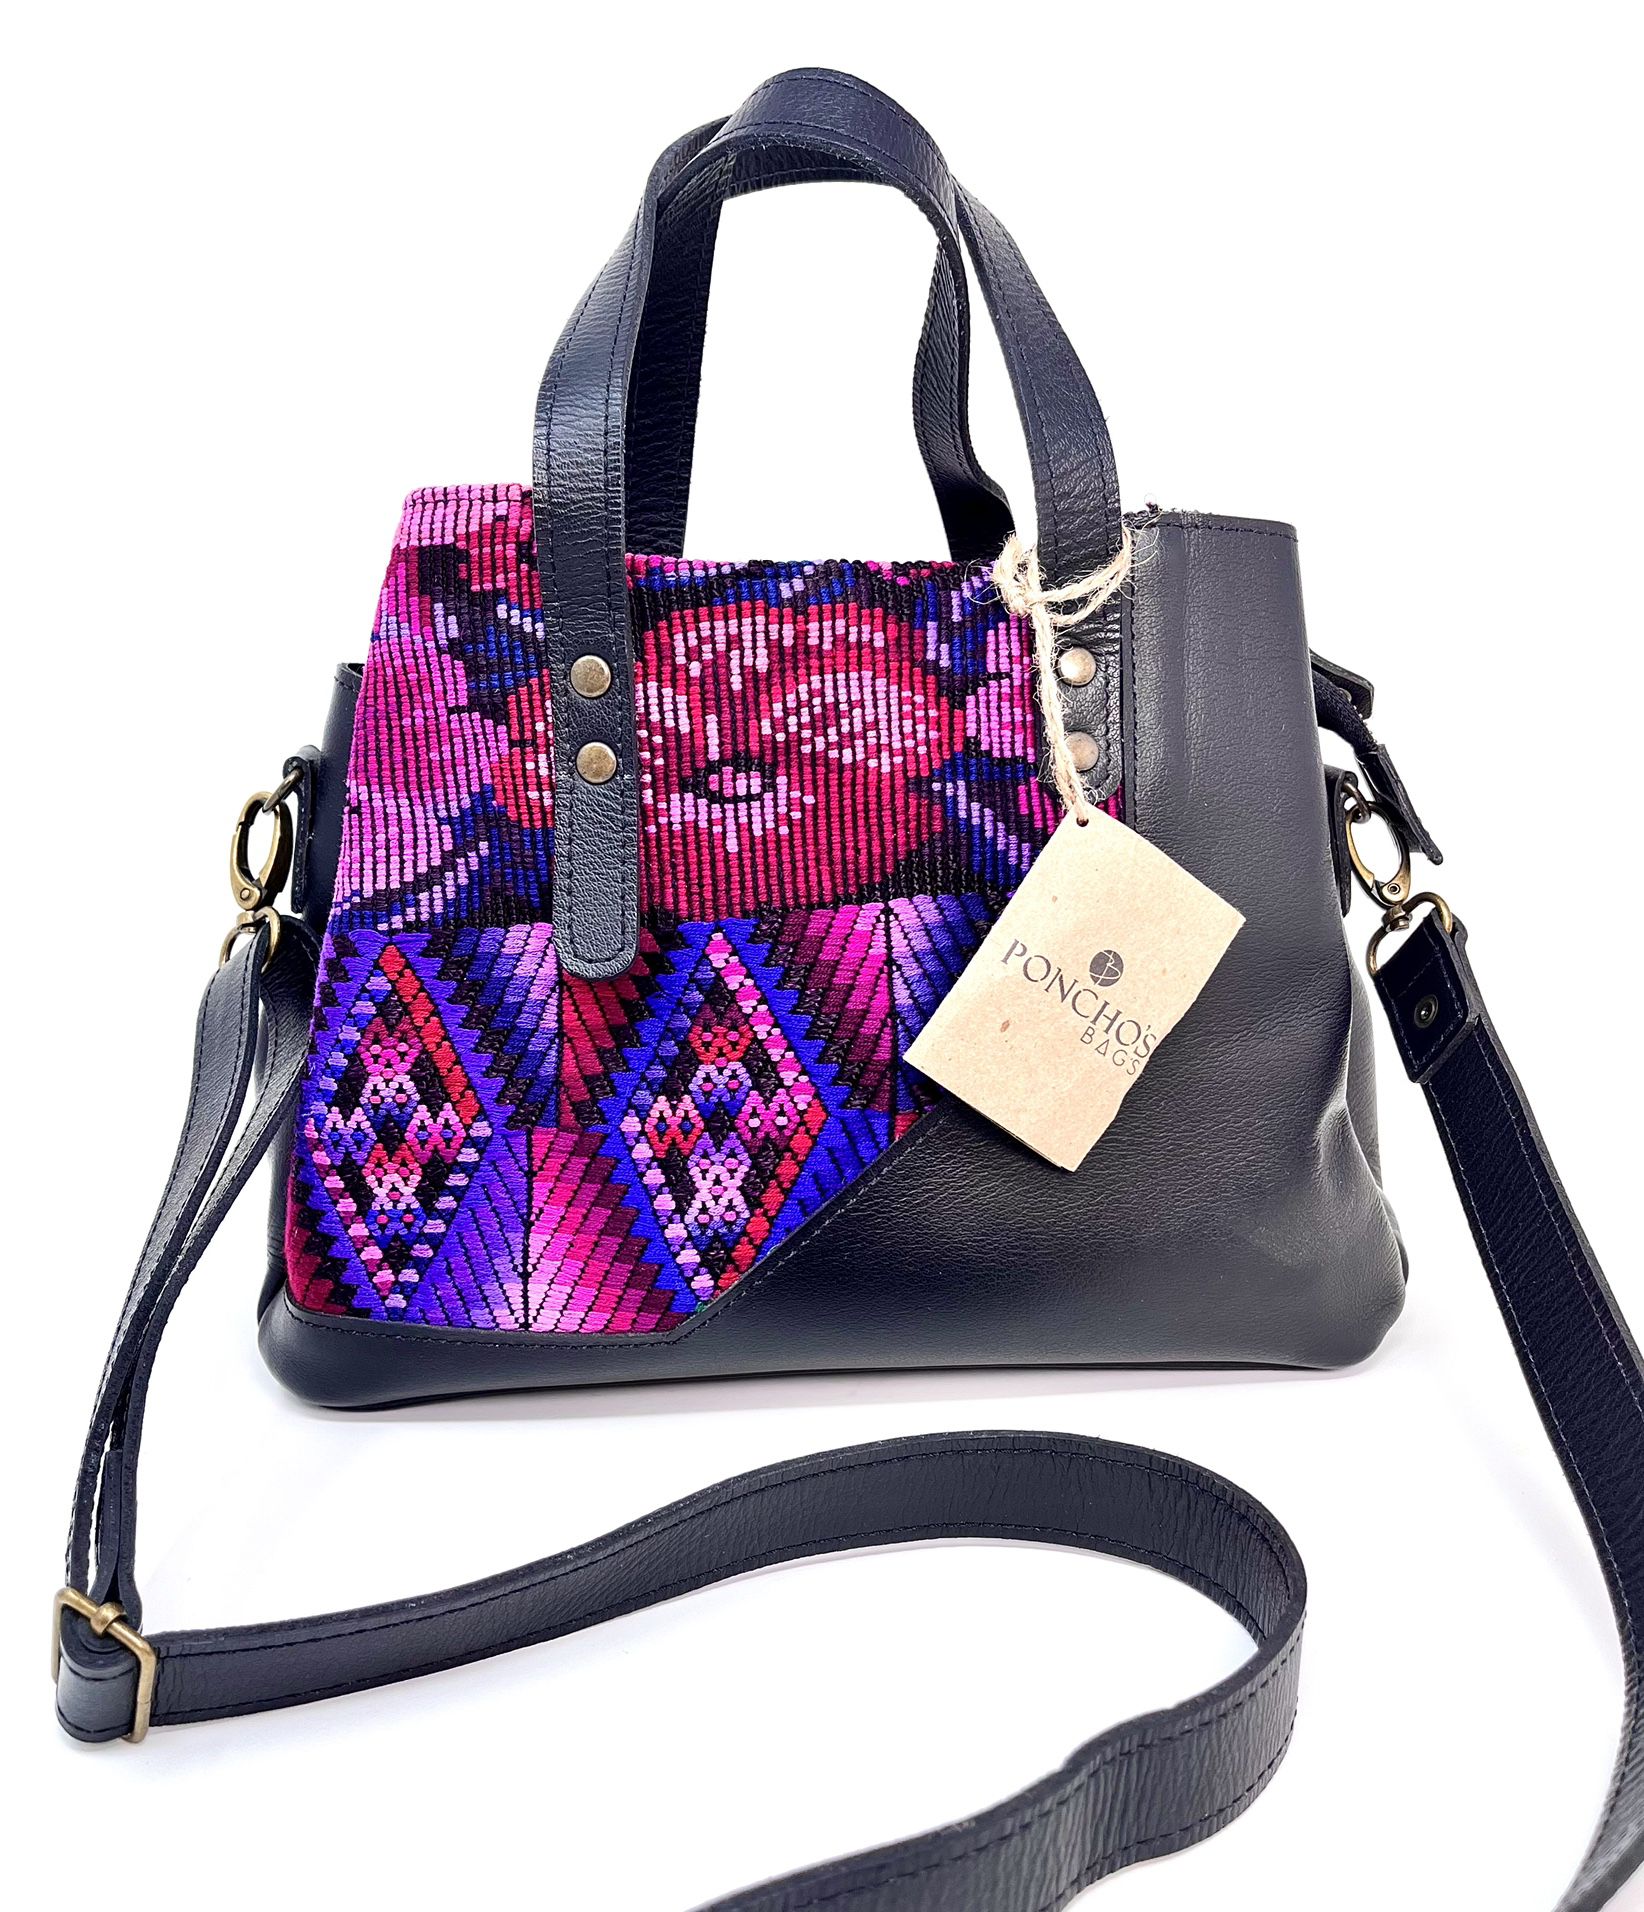 Poncho’s Bags Artisan Hand Crafted Leather And Huipil Bag From Guatemala